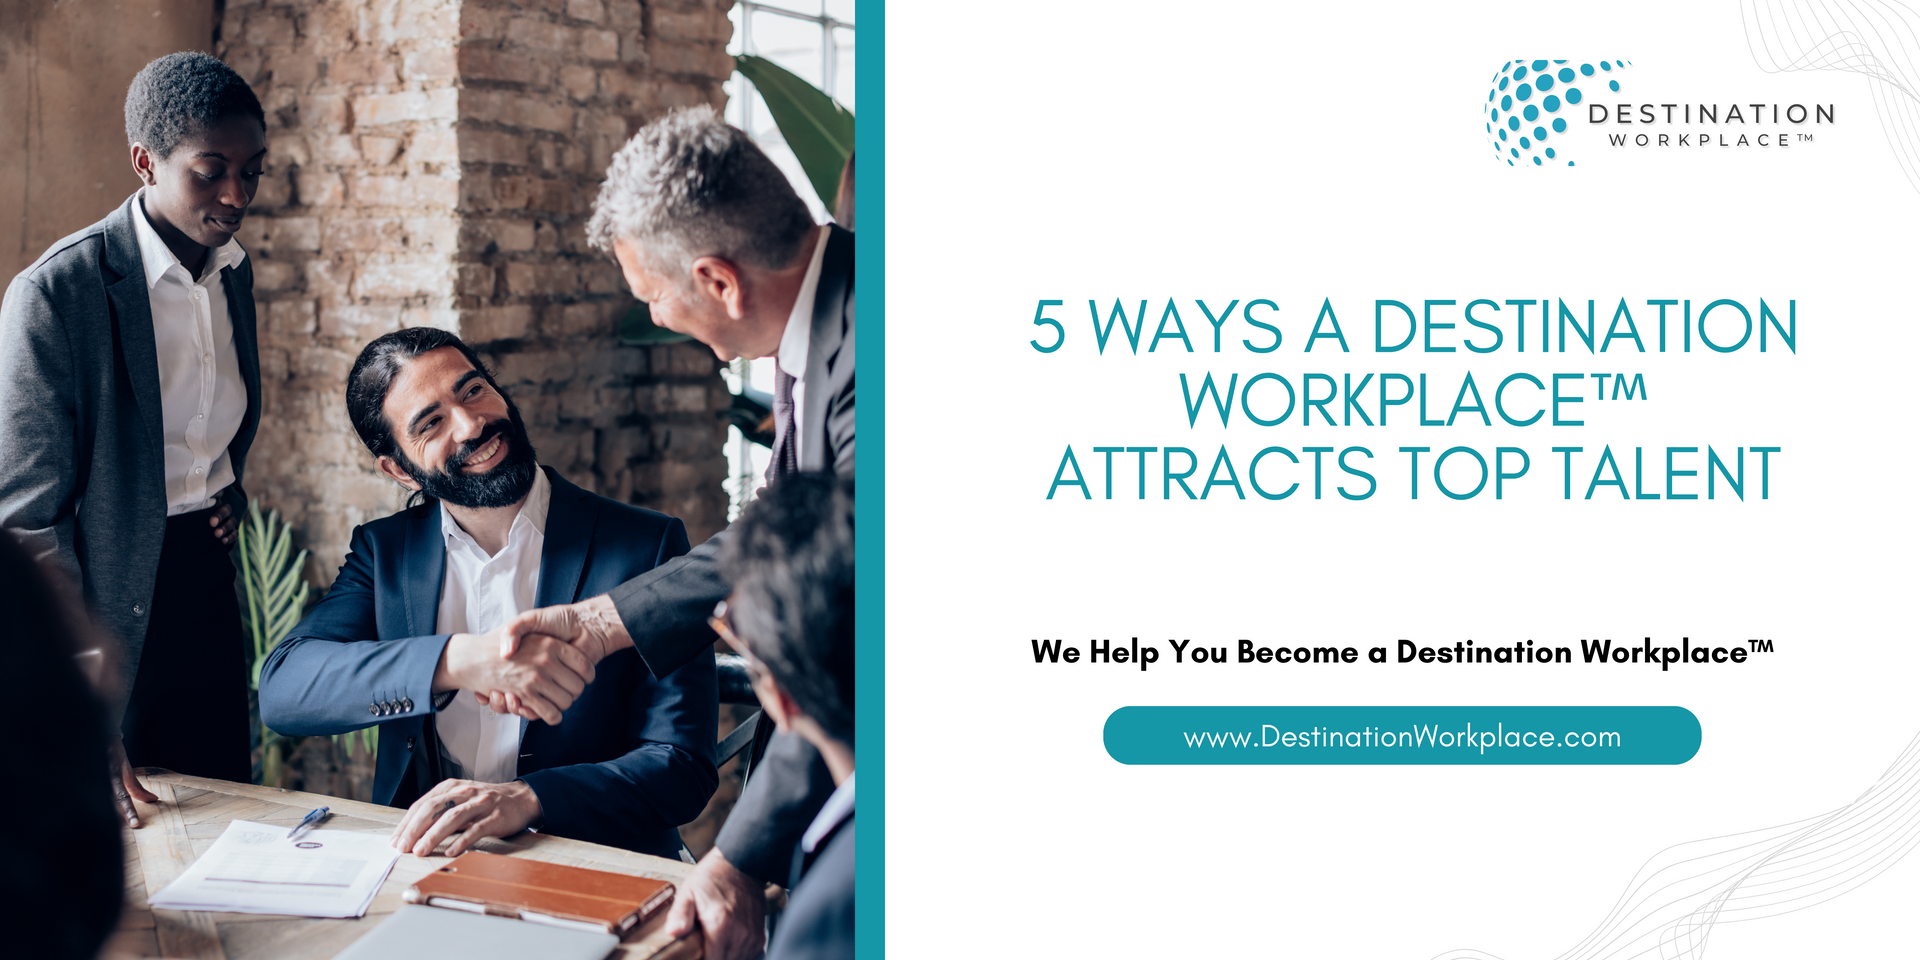 Want to know the secret that Destination Workplaces™ use for attracting top talent? Read our latest 